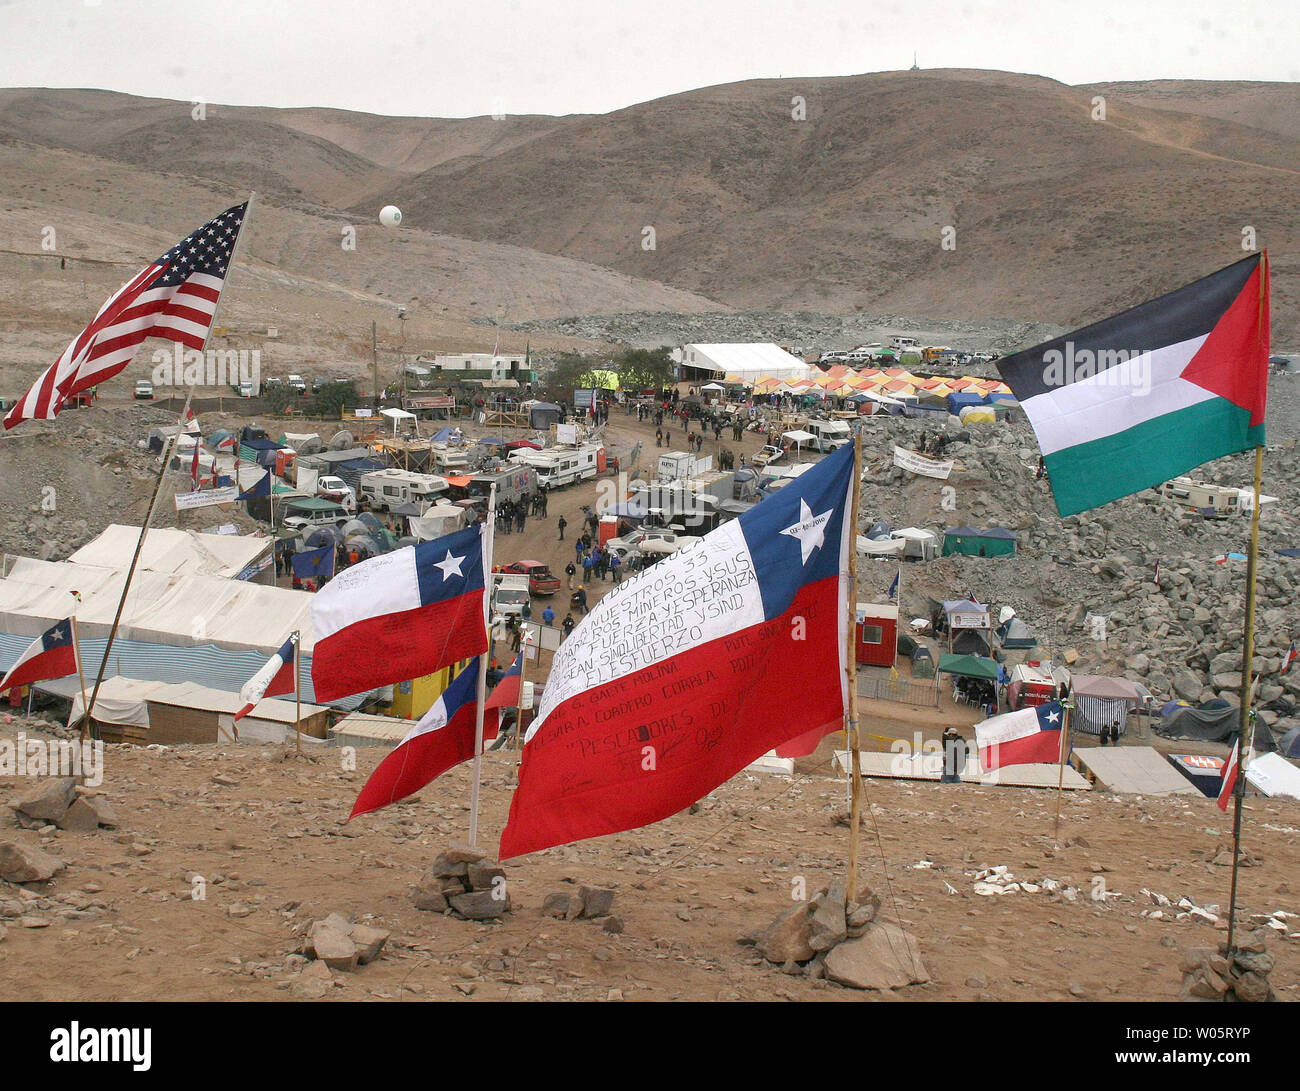 Flags adorn a hill at Camp Hope as preparations continue to rescue the 33 trapped miners at San Jose Mine, Chile on October 11, 2010.   If all goes well, officials say the first miners will be brought up in a few days via a 20-minute ride in a rescue capsule more than 2,000 feet below the surface.   The miners have been trapped for more than two months.   UPI/Sebastian Padilla Stock Photo